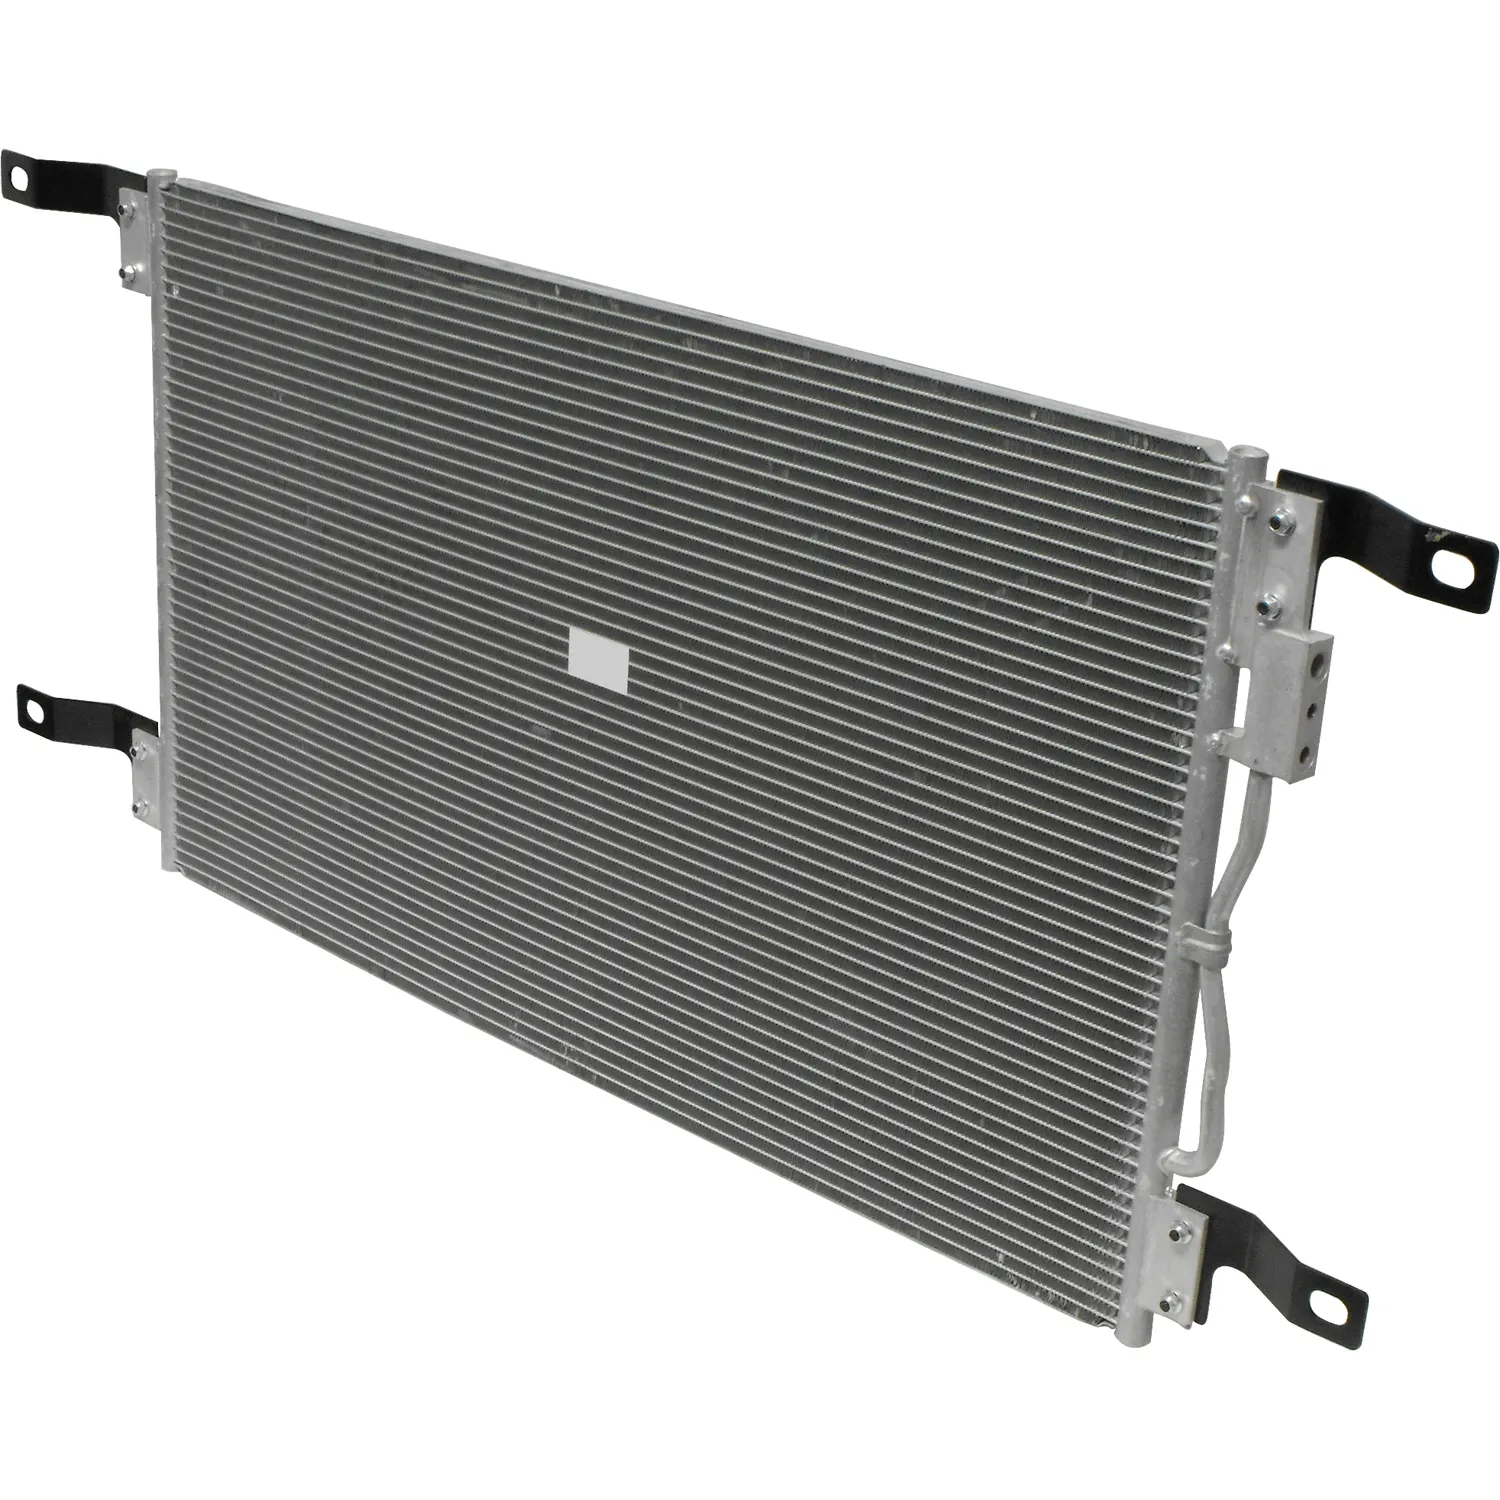 Auto Condenser In Air Conditioning System For Freightliner Coronado